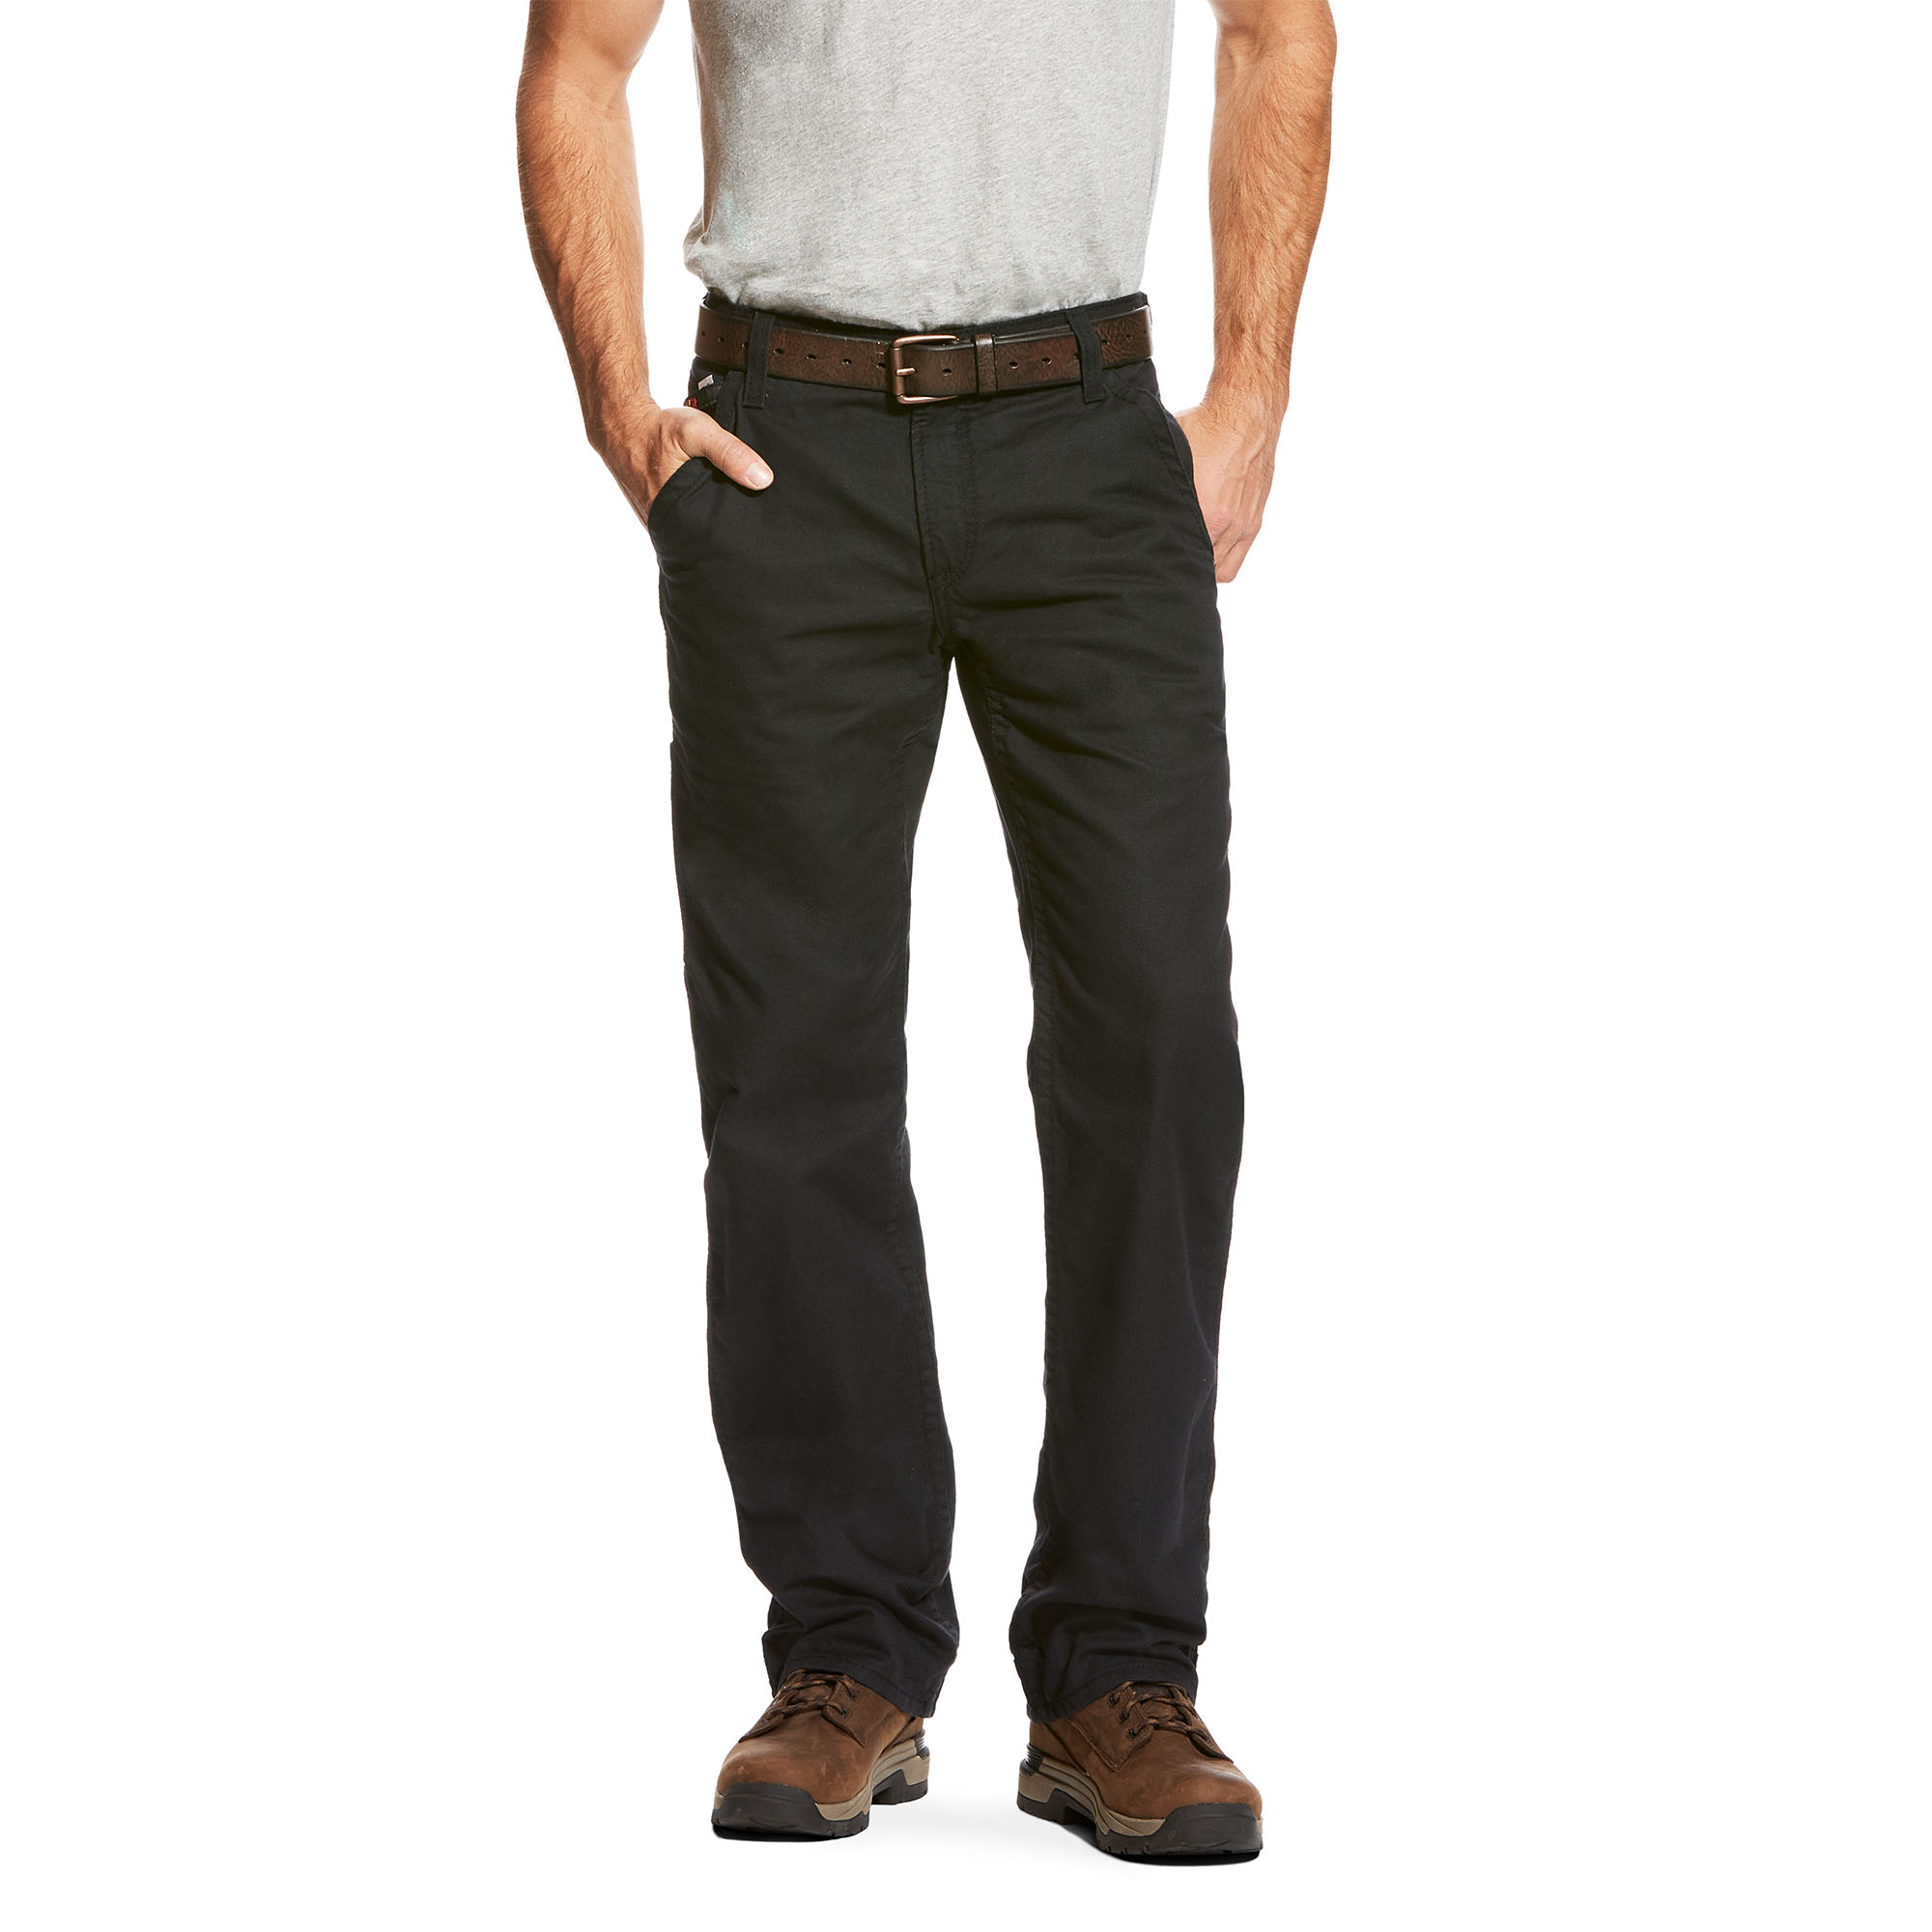 Top more than 89 low rise work pants - in.eteachers